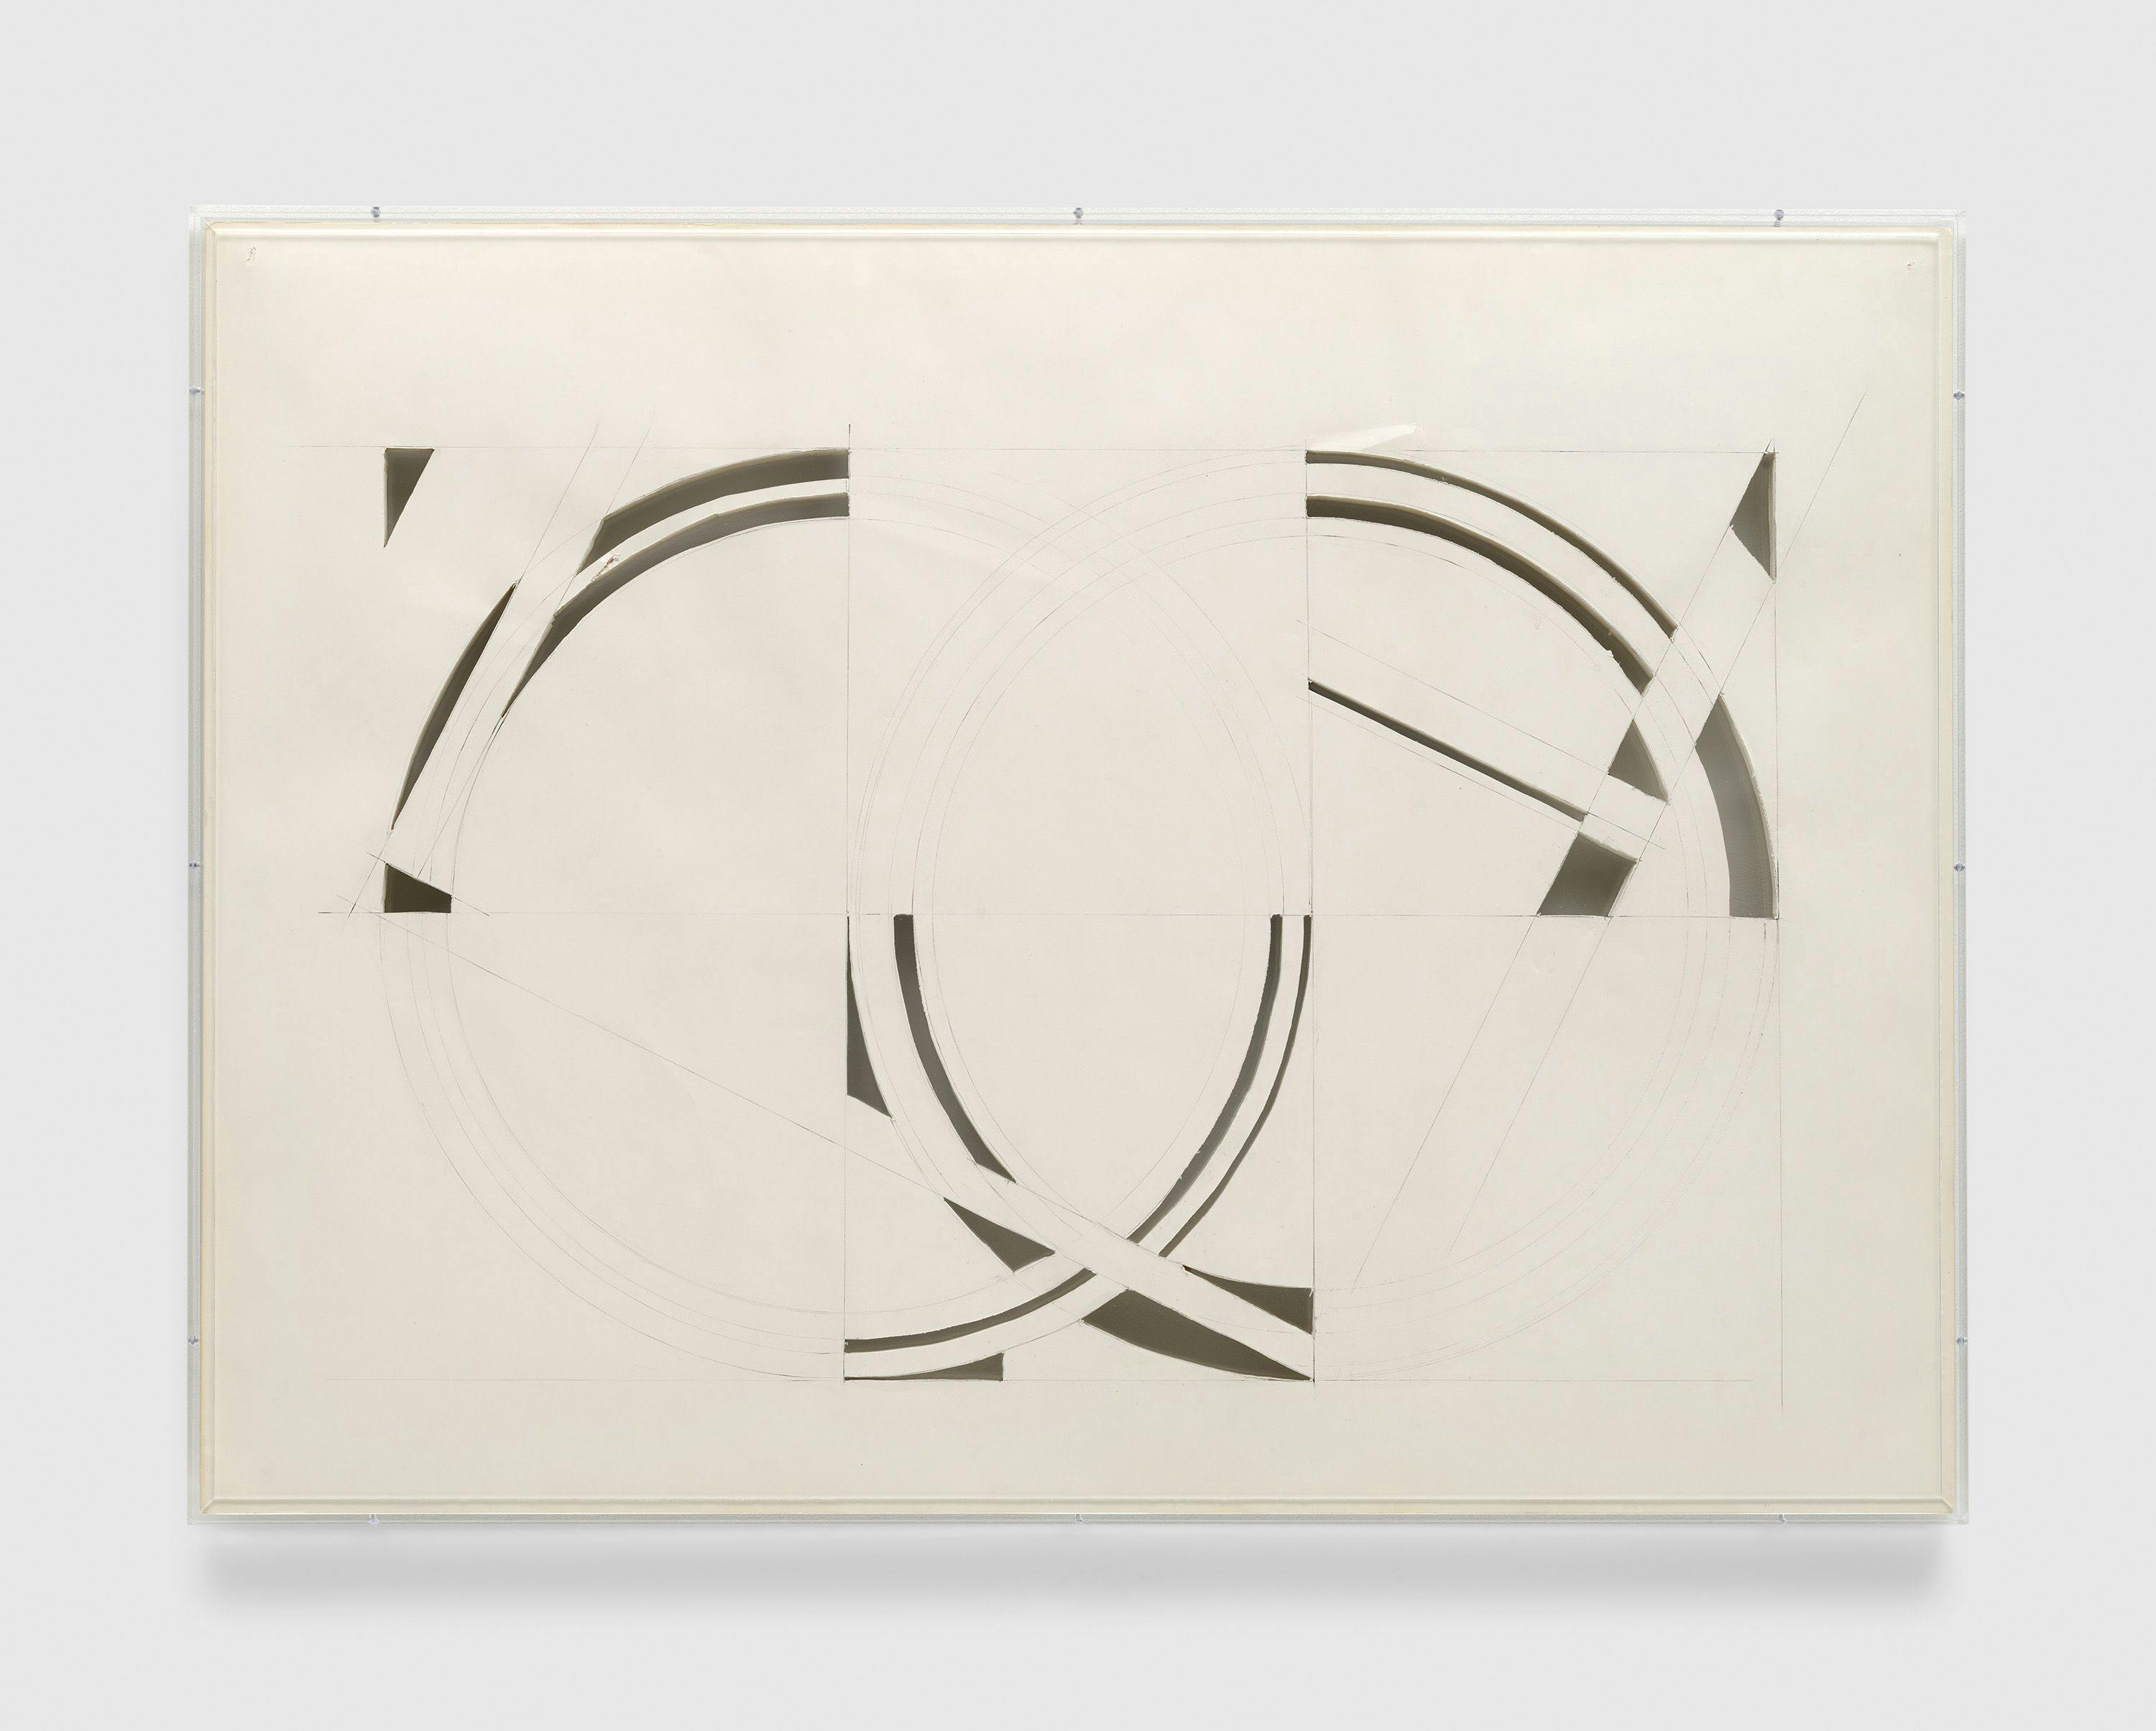 A drawing by Gordon Matta-Clark, titled Cycle Grid Overlay, dated 1977.